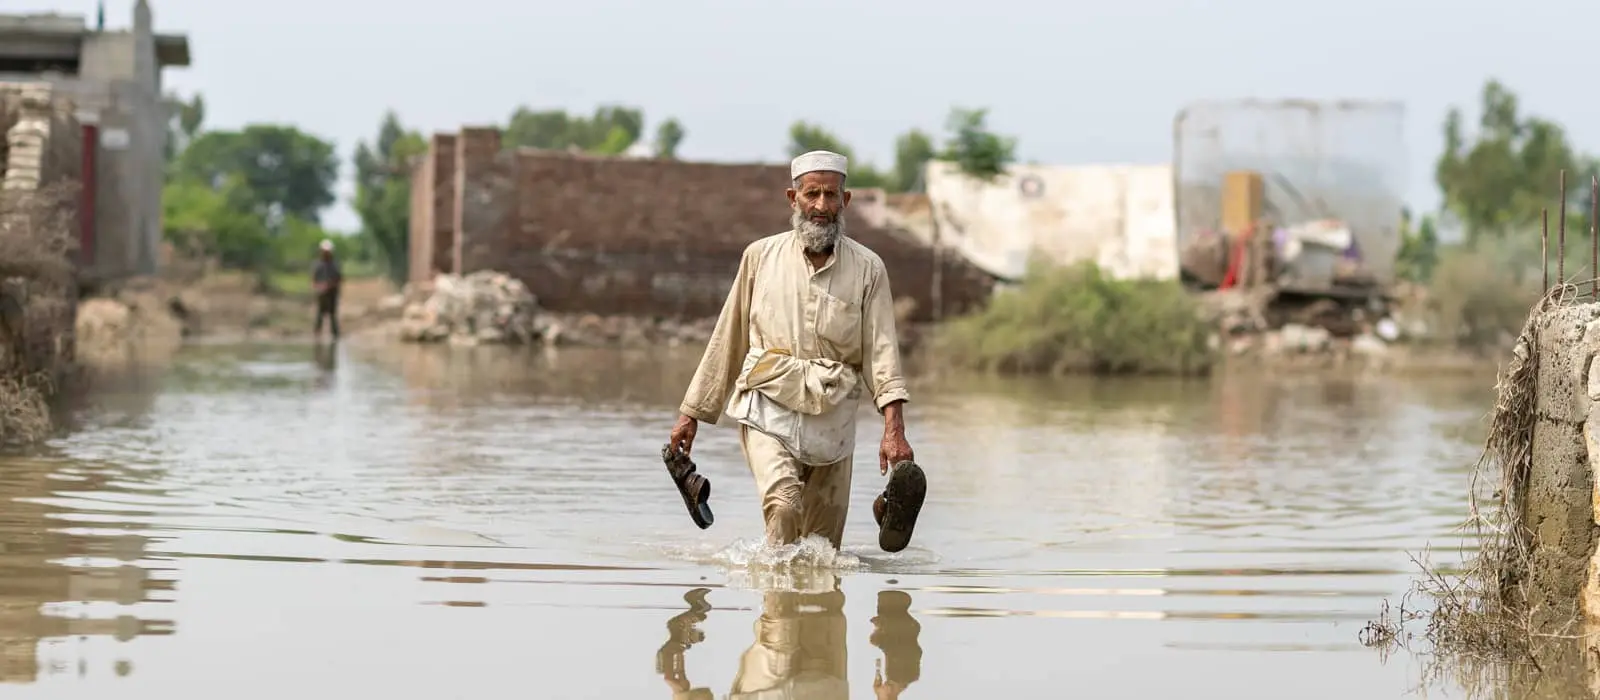 Man standing in flooding in the Nowshera District, Khyber Pakhtunkhwa